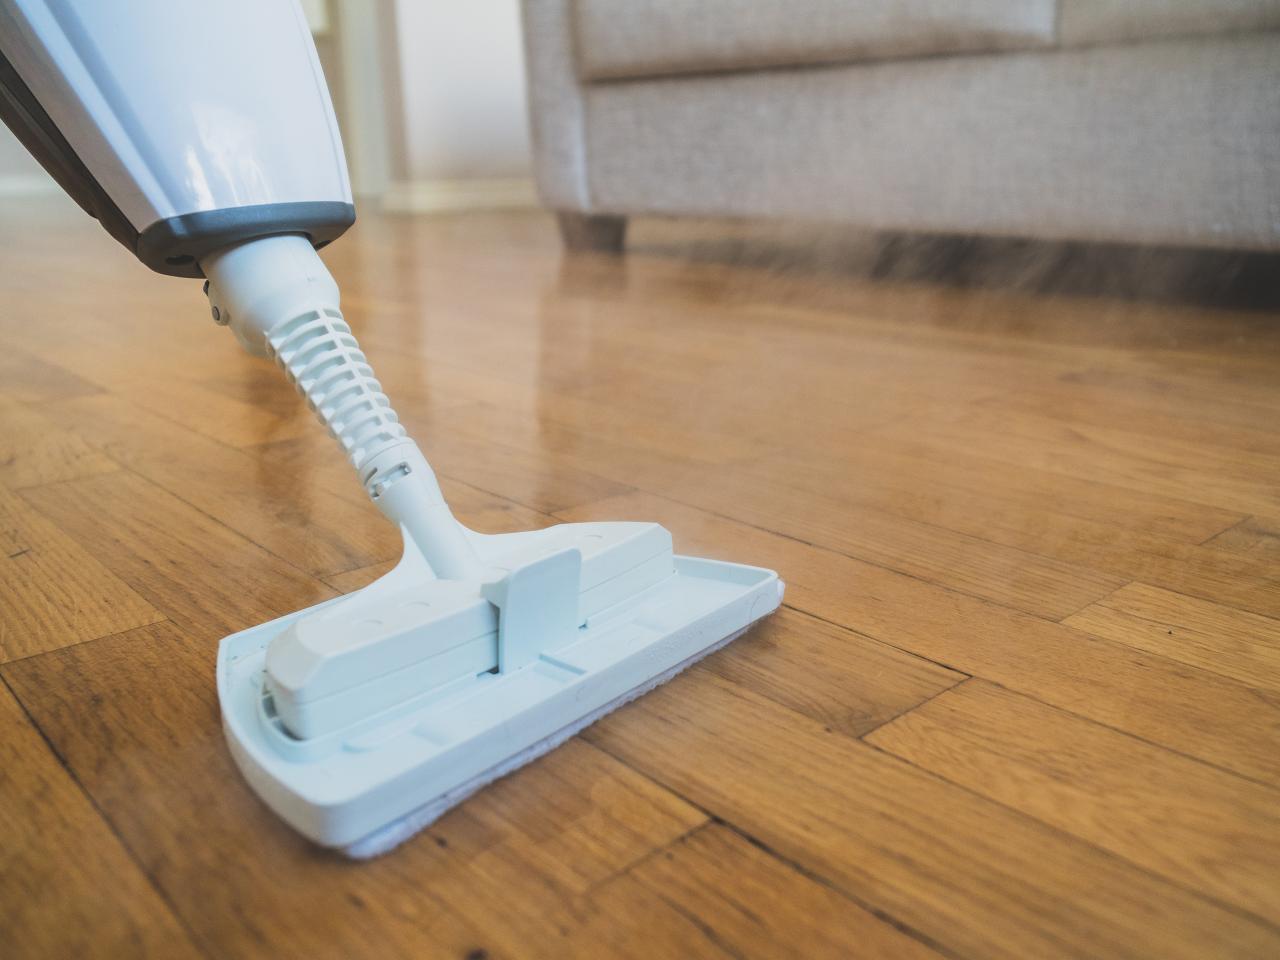 Floor With A Steam Mop, Can You Steam Mop Laminate Wood Floors